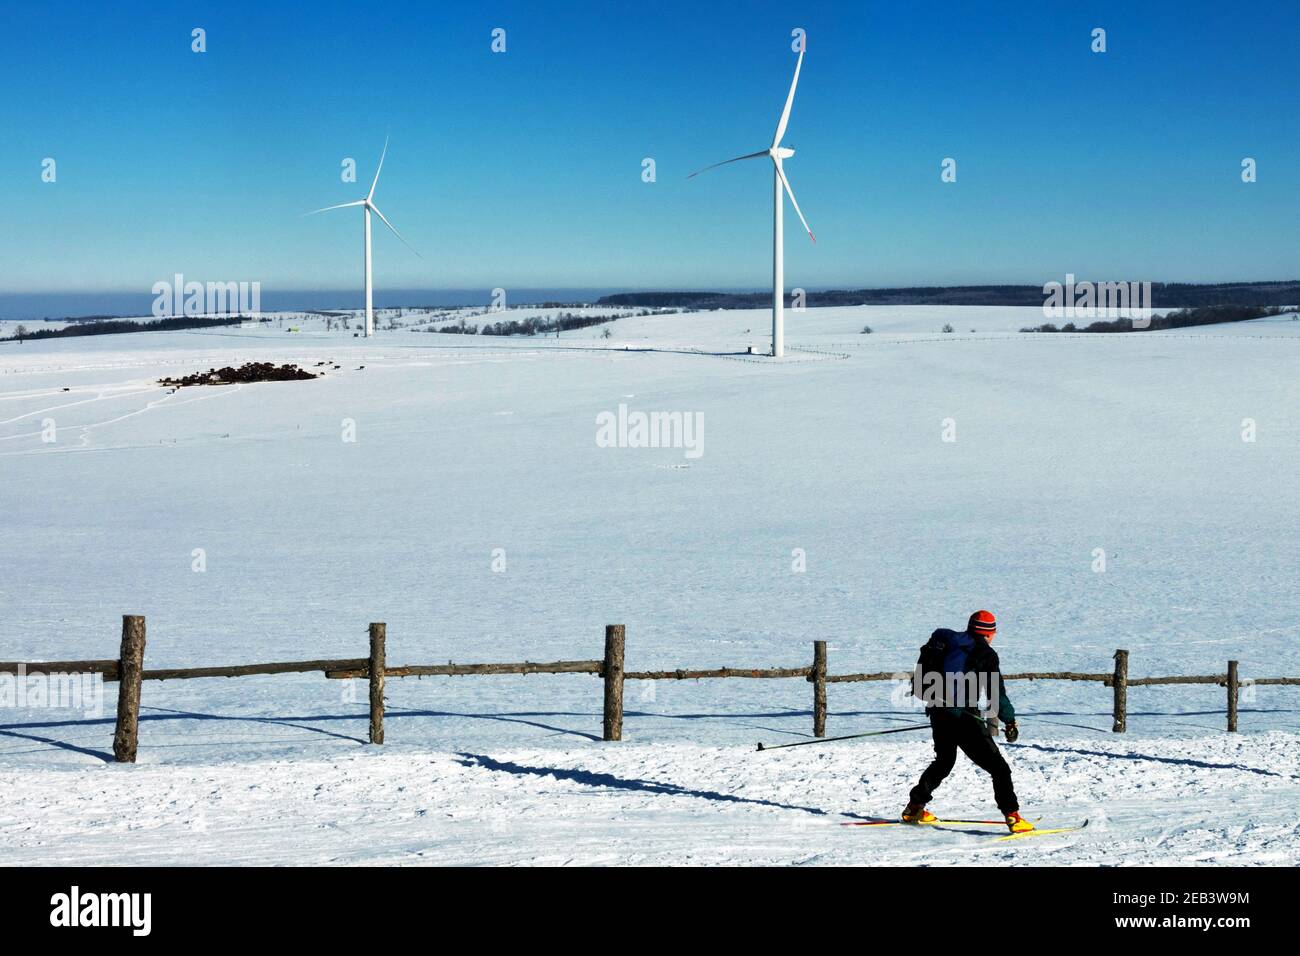 Plateau scenery, snow-covered mountain meadows, wind turbines Ore Mountains Czech Republic landscape single skier cross country skiing Stock Photo